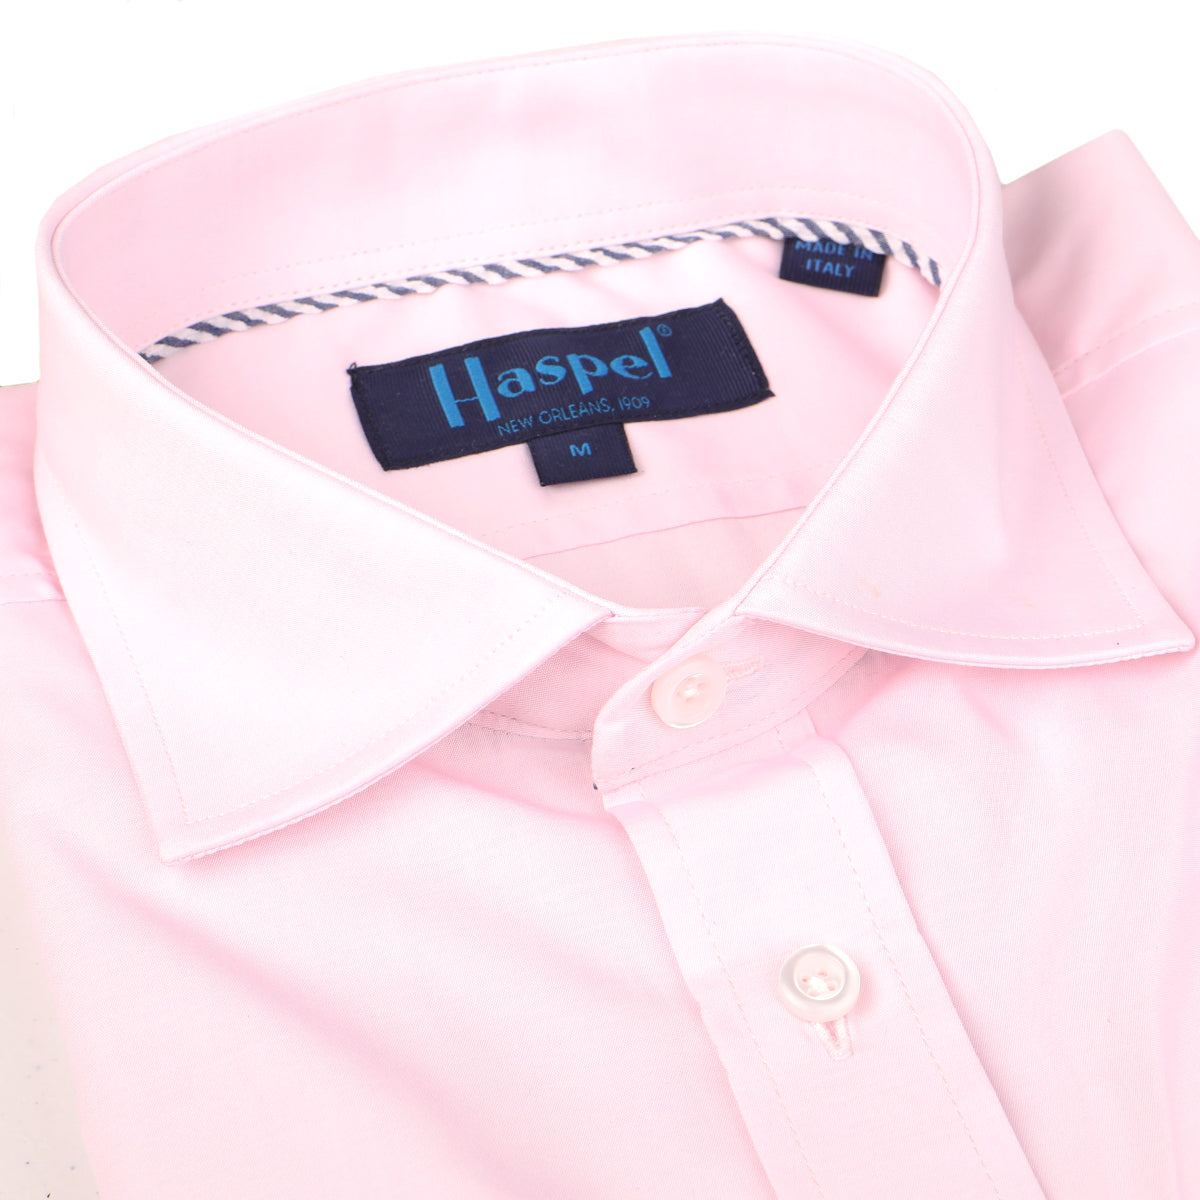 Broadcloth to adorn those broad shoulders. Pretty in pink. Damn right.  100% Cotton  •  Long Sleeve  •  Spread Collar  •  Chest Pocket  •  Button Cuff  •  Machine Washable  •  Made in Italy Return Policy